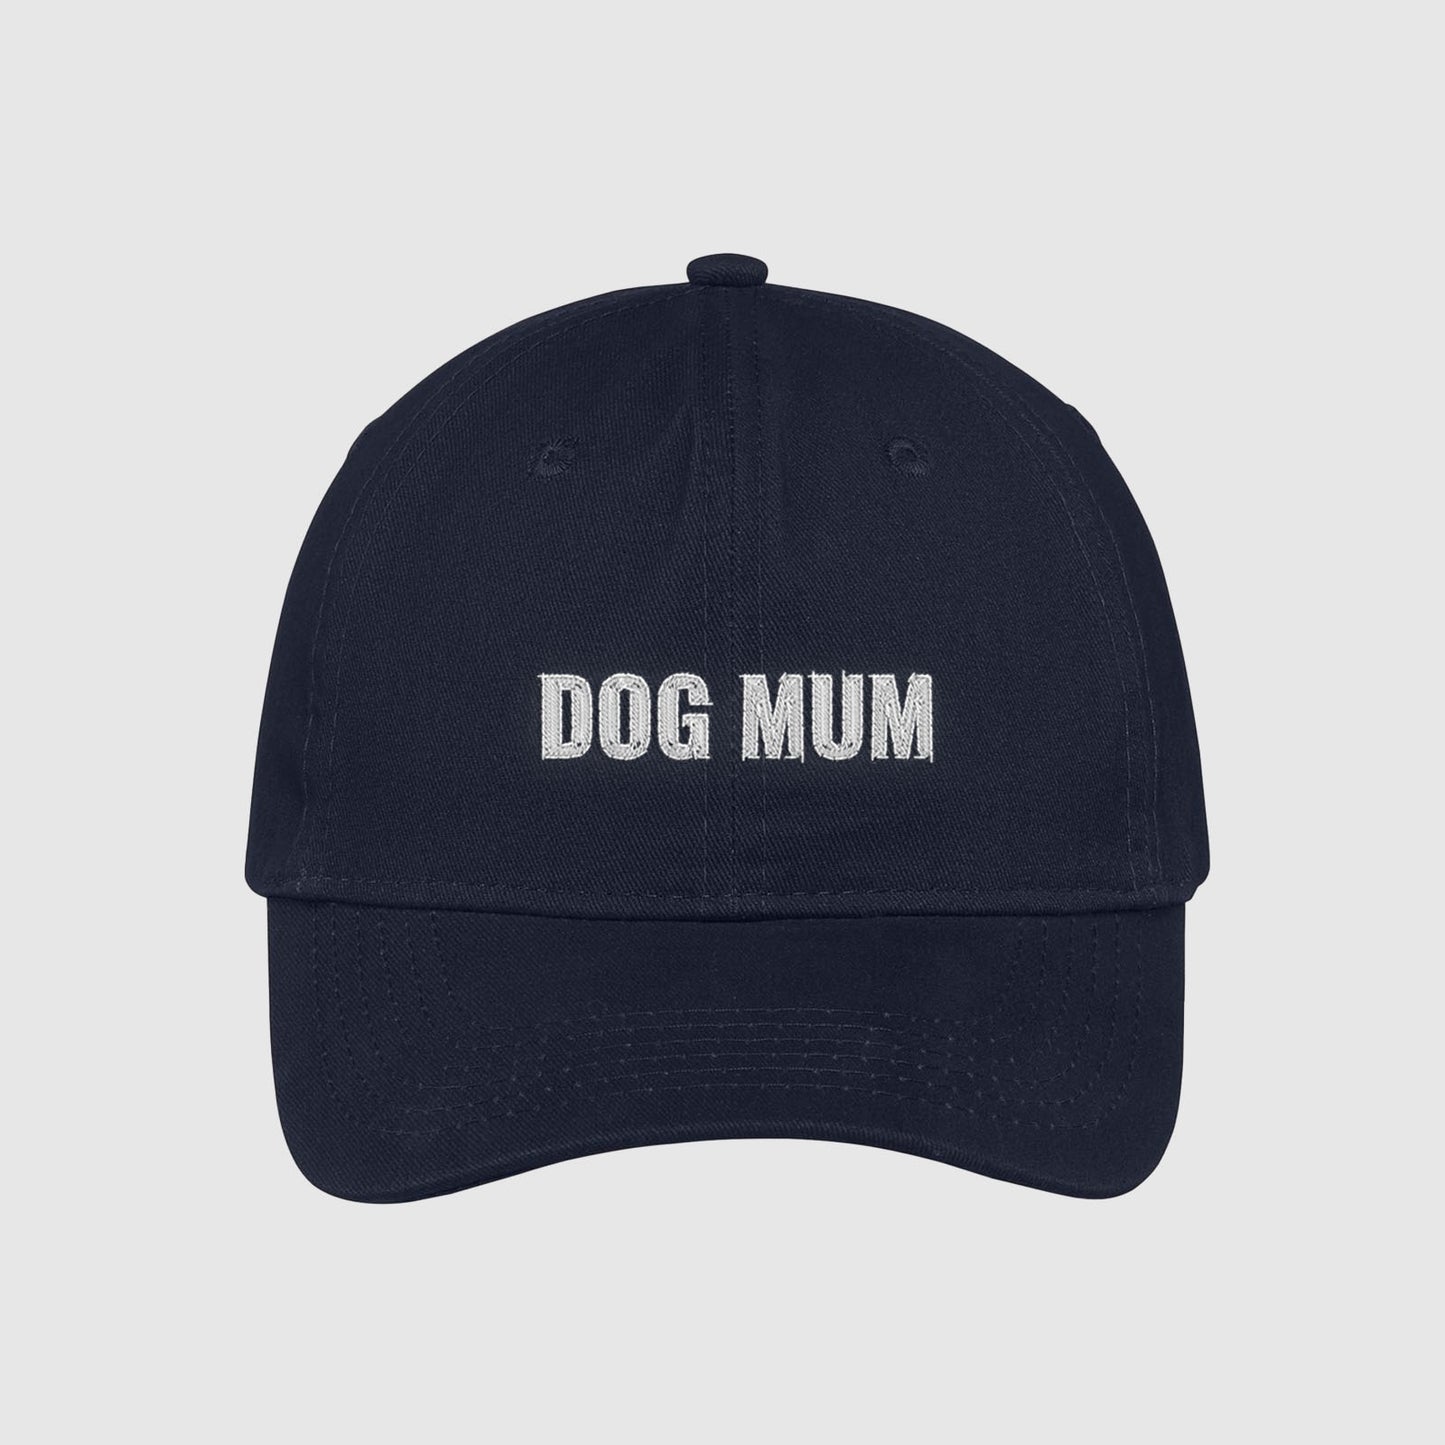 Navy Dog Mum Hat embroidered with white text.